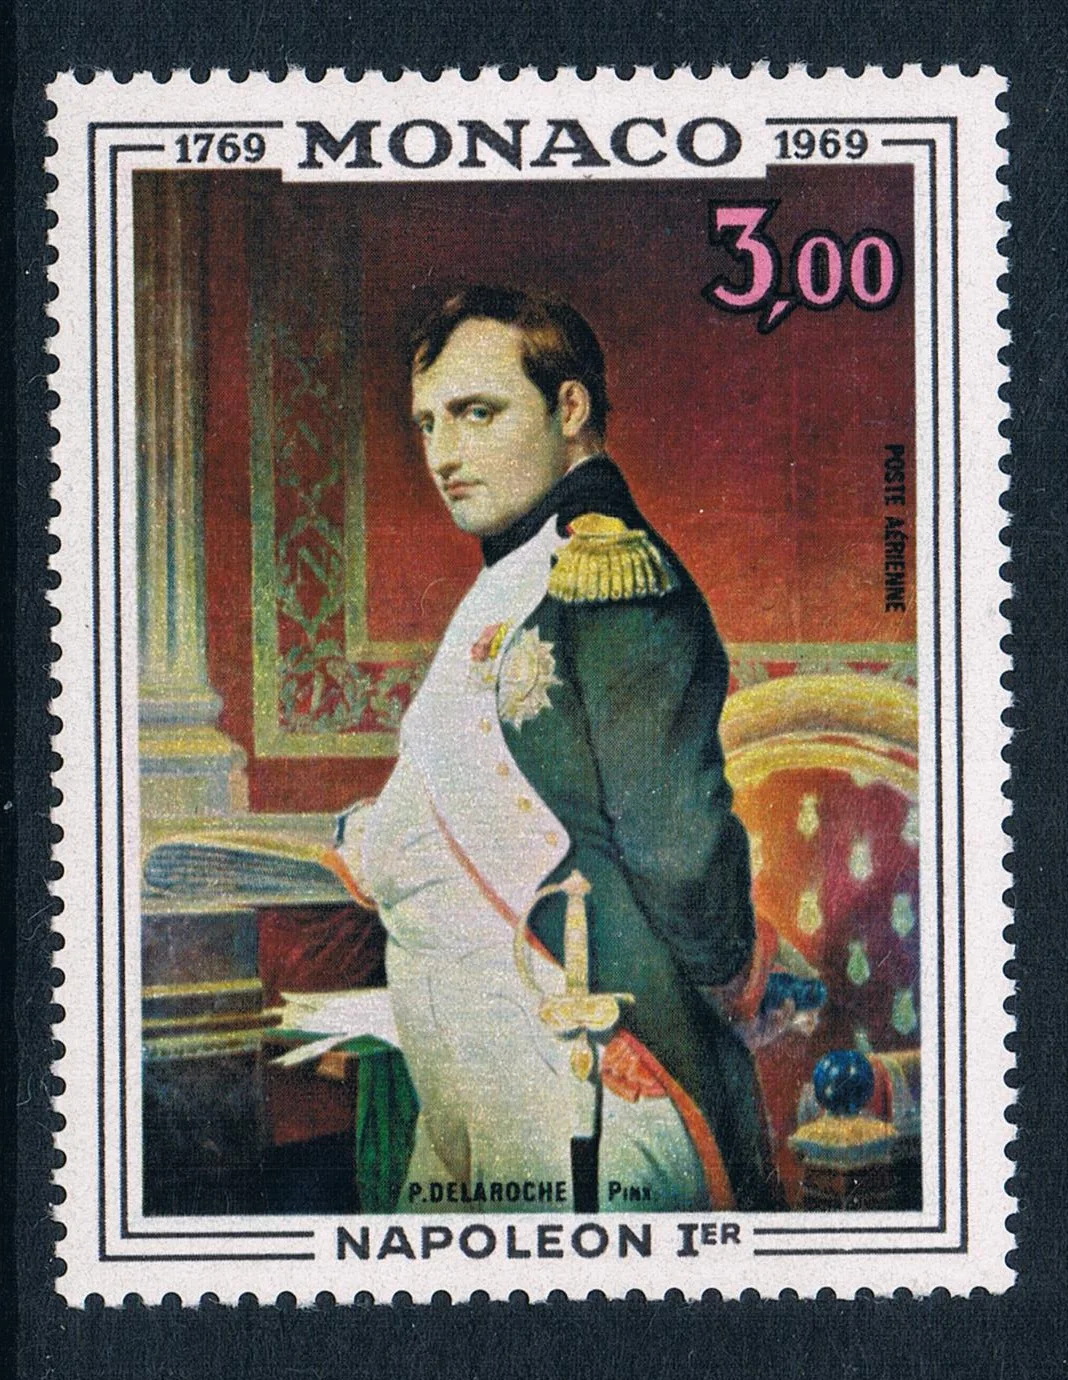 

1Pcs/Set New Monaco Post Stamp 1969 Two Hundred Years of Napoleon's Birthday Painting Stamps MNH